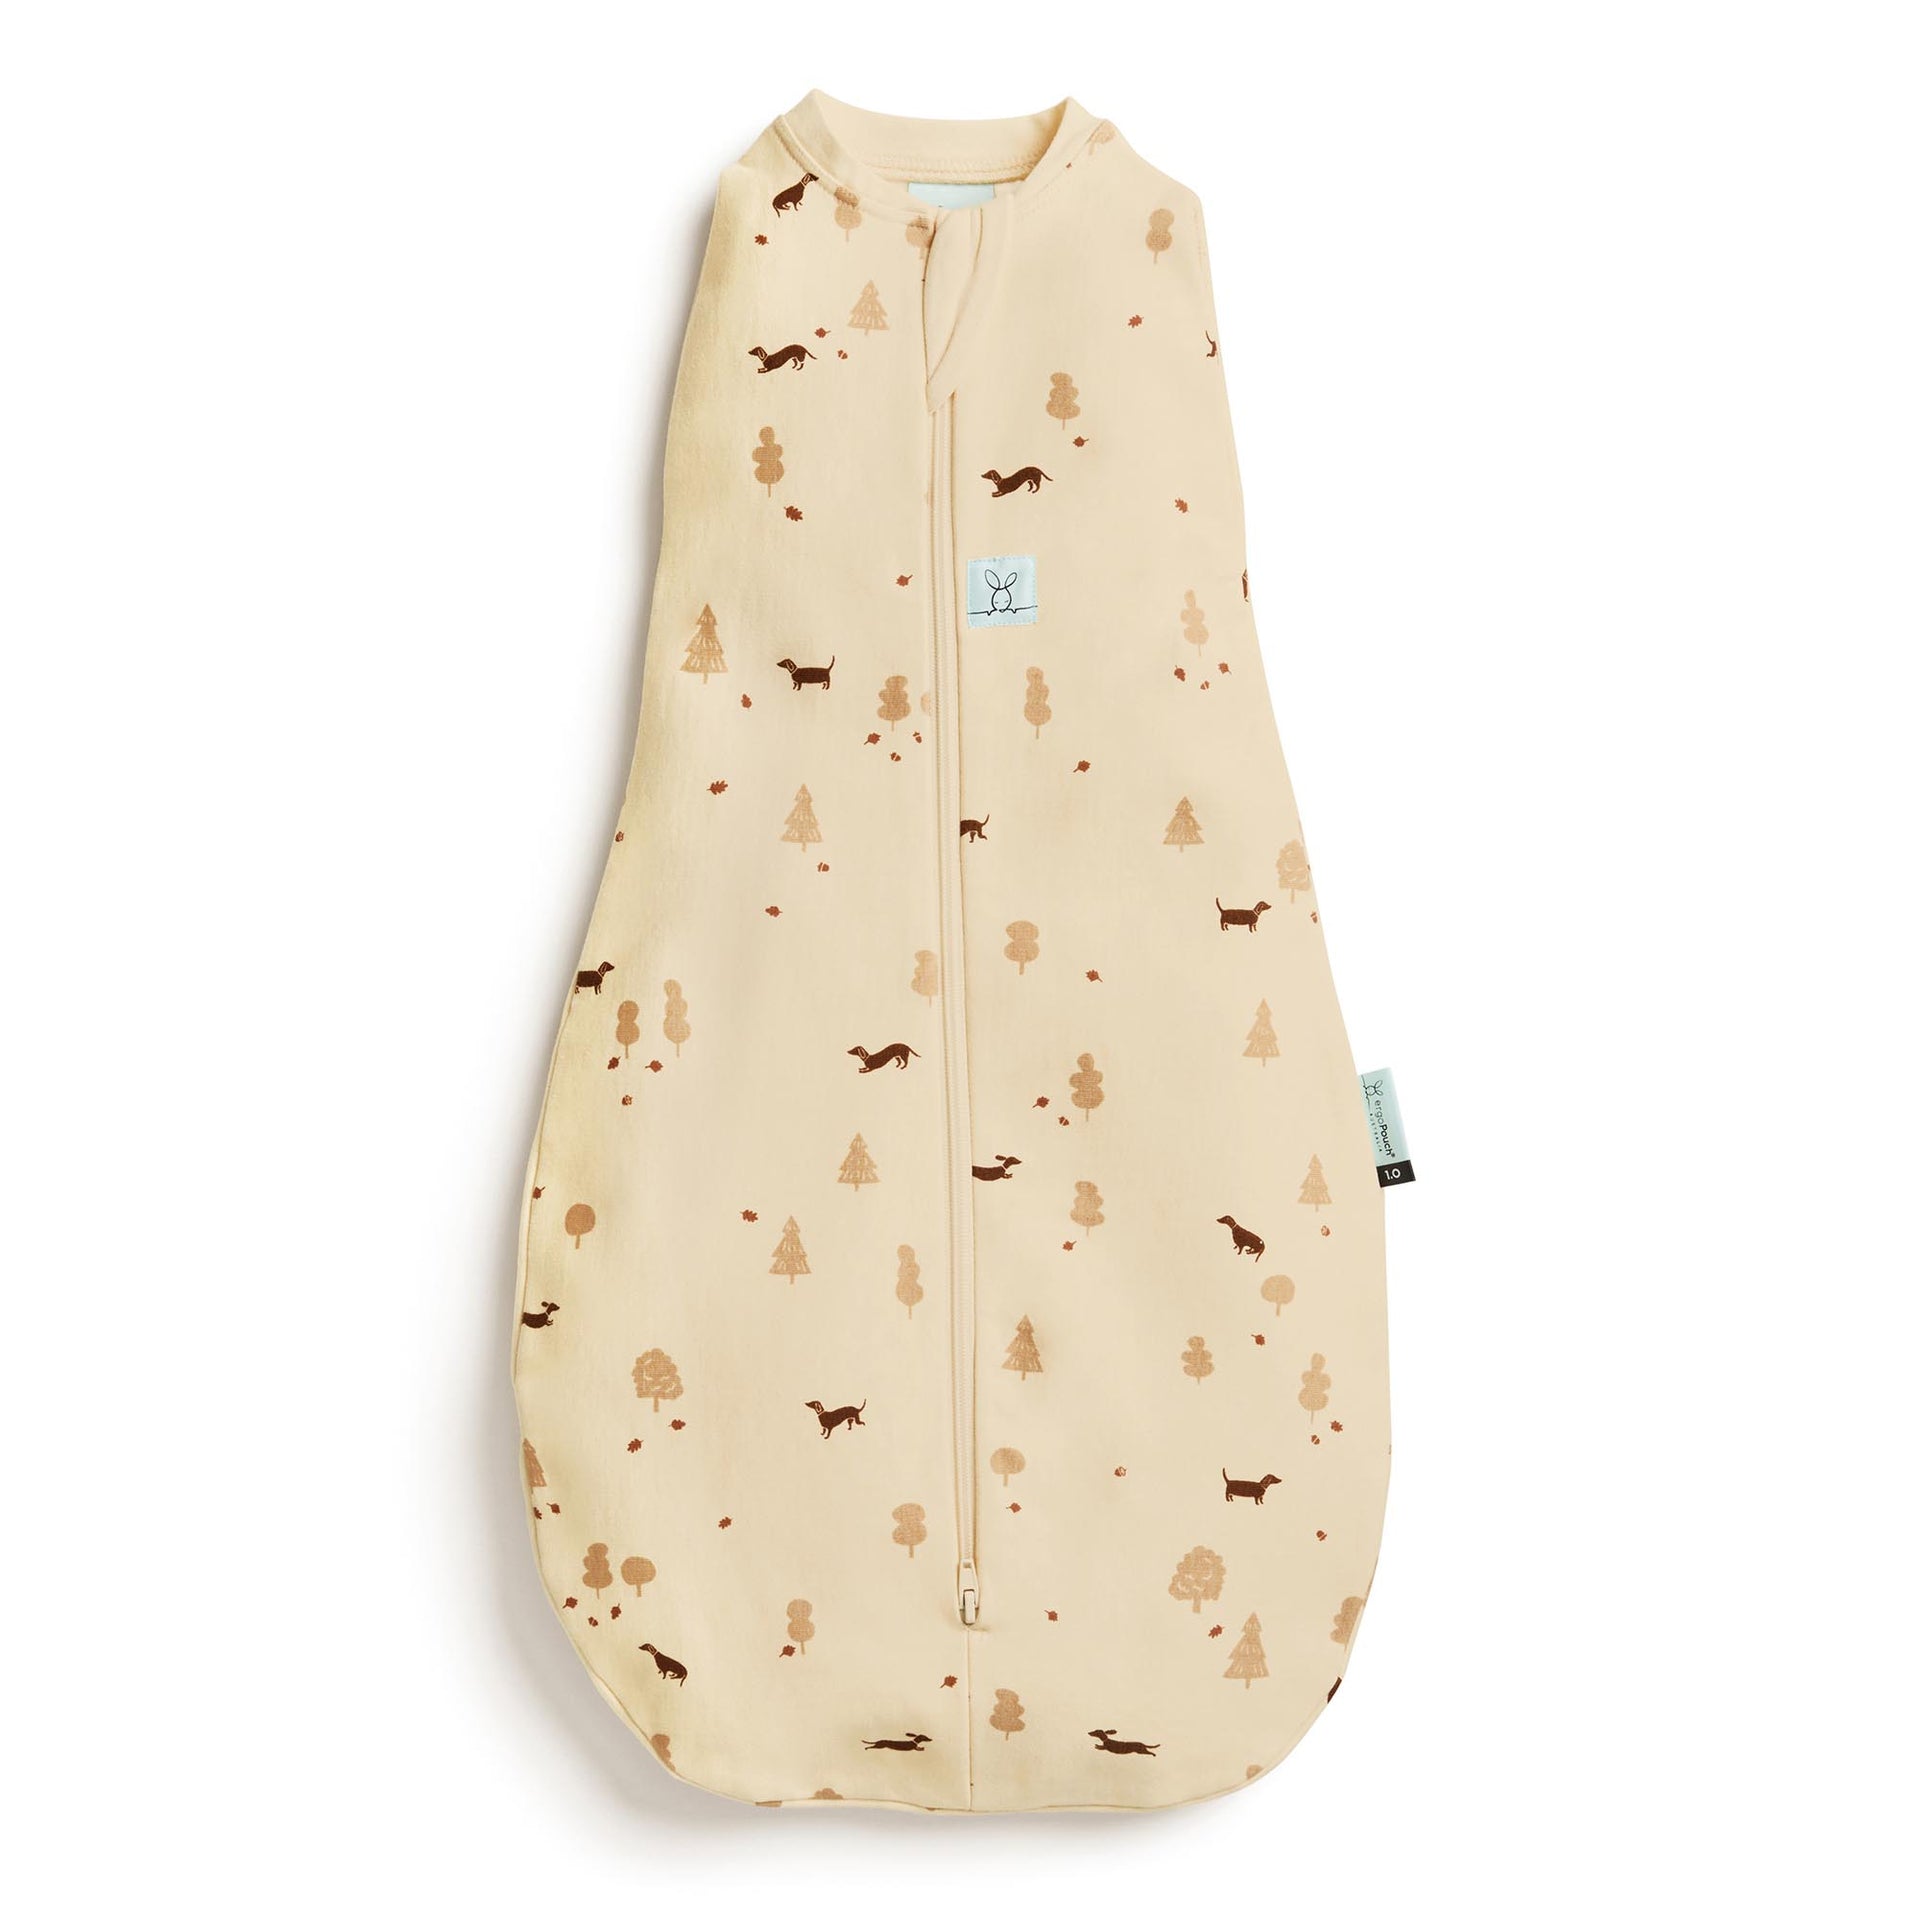 ErgoPouch 1.0 Tog Cocoon Swaddle Bag 0-3 Months Night Sky